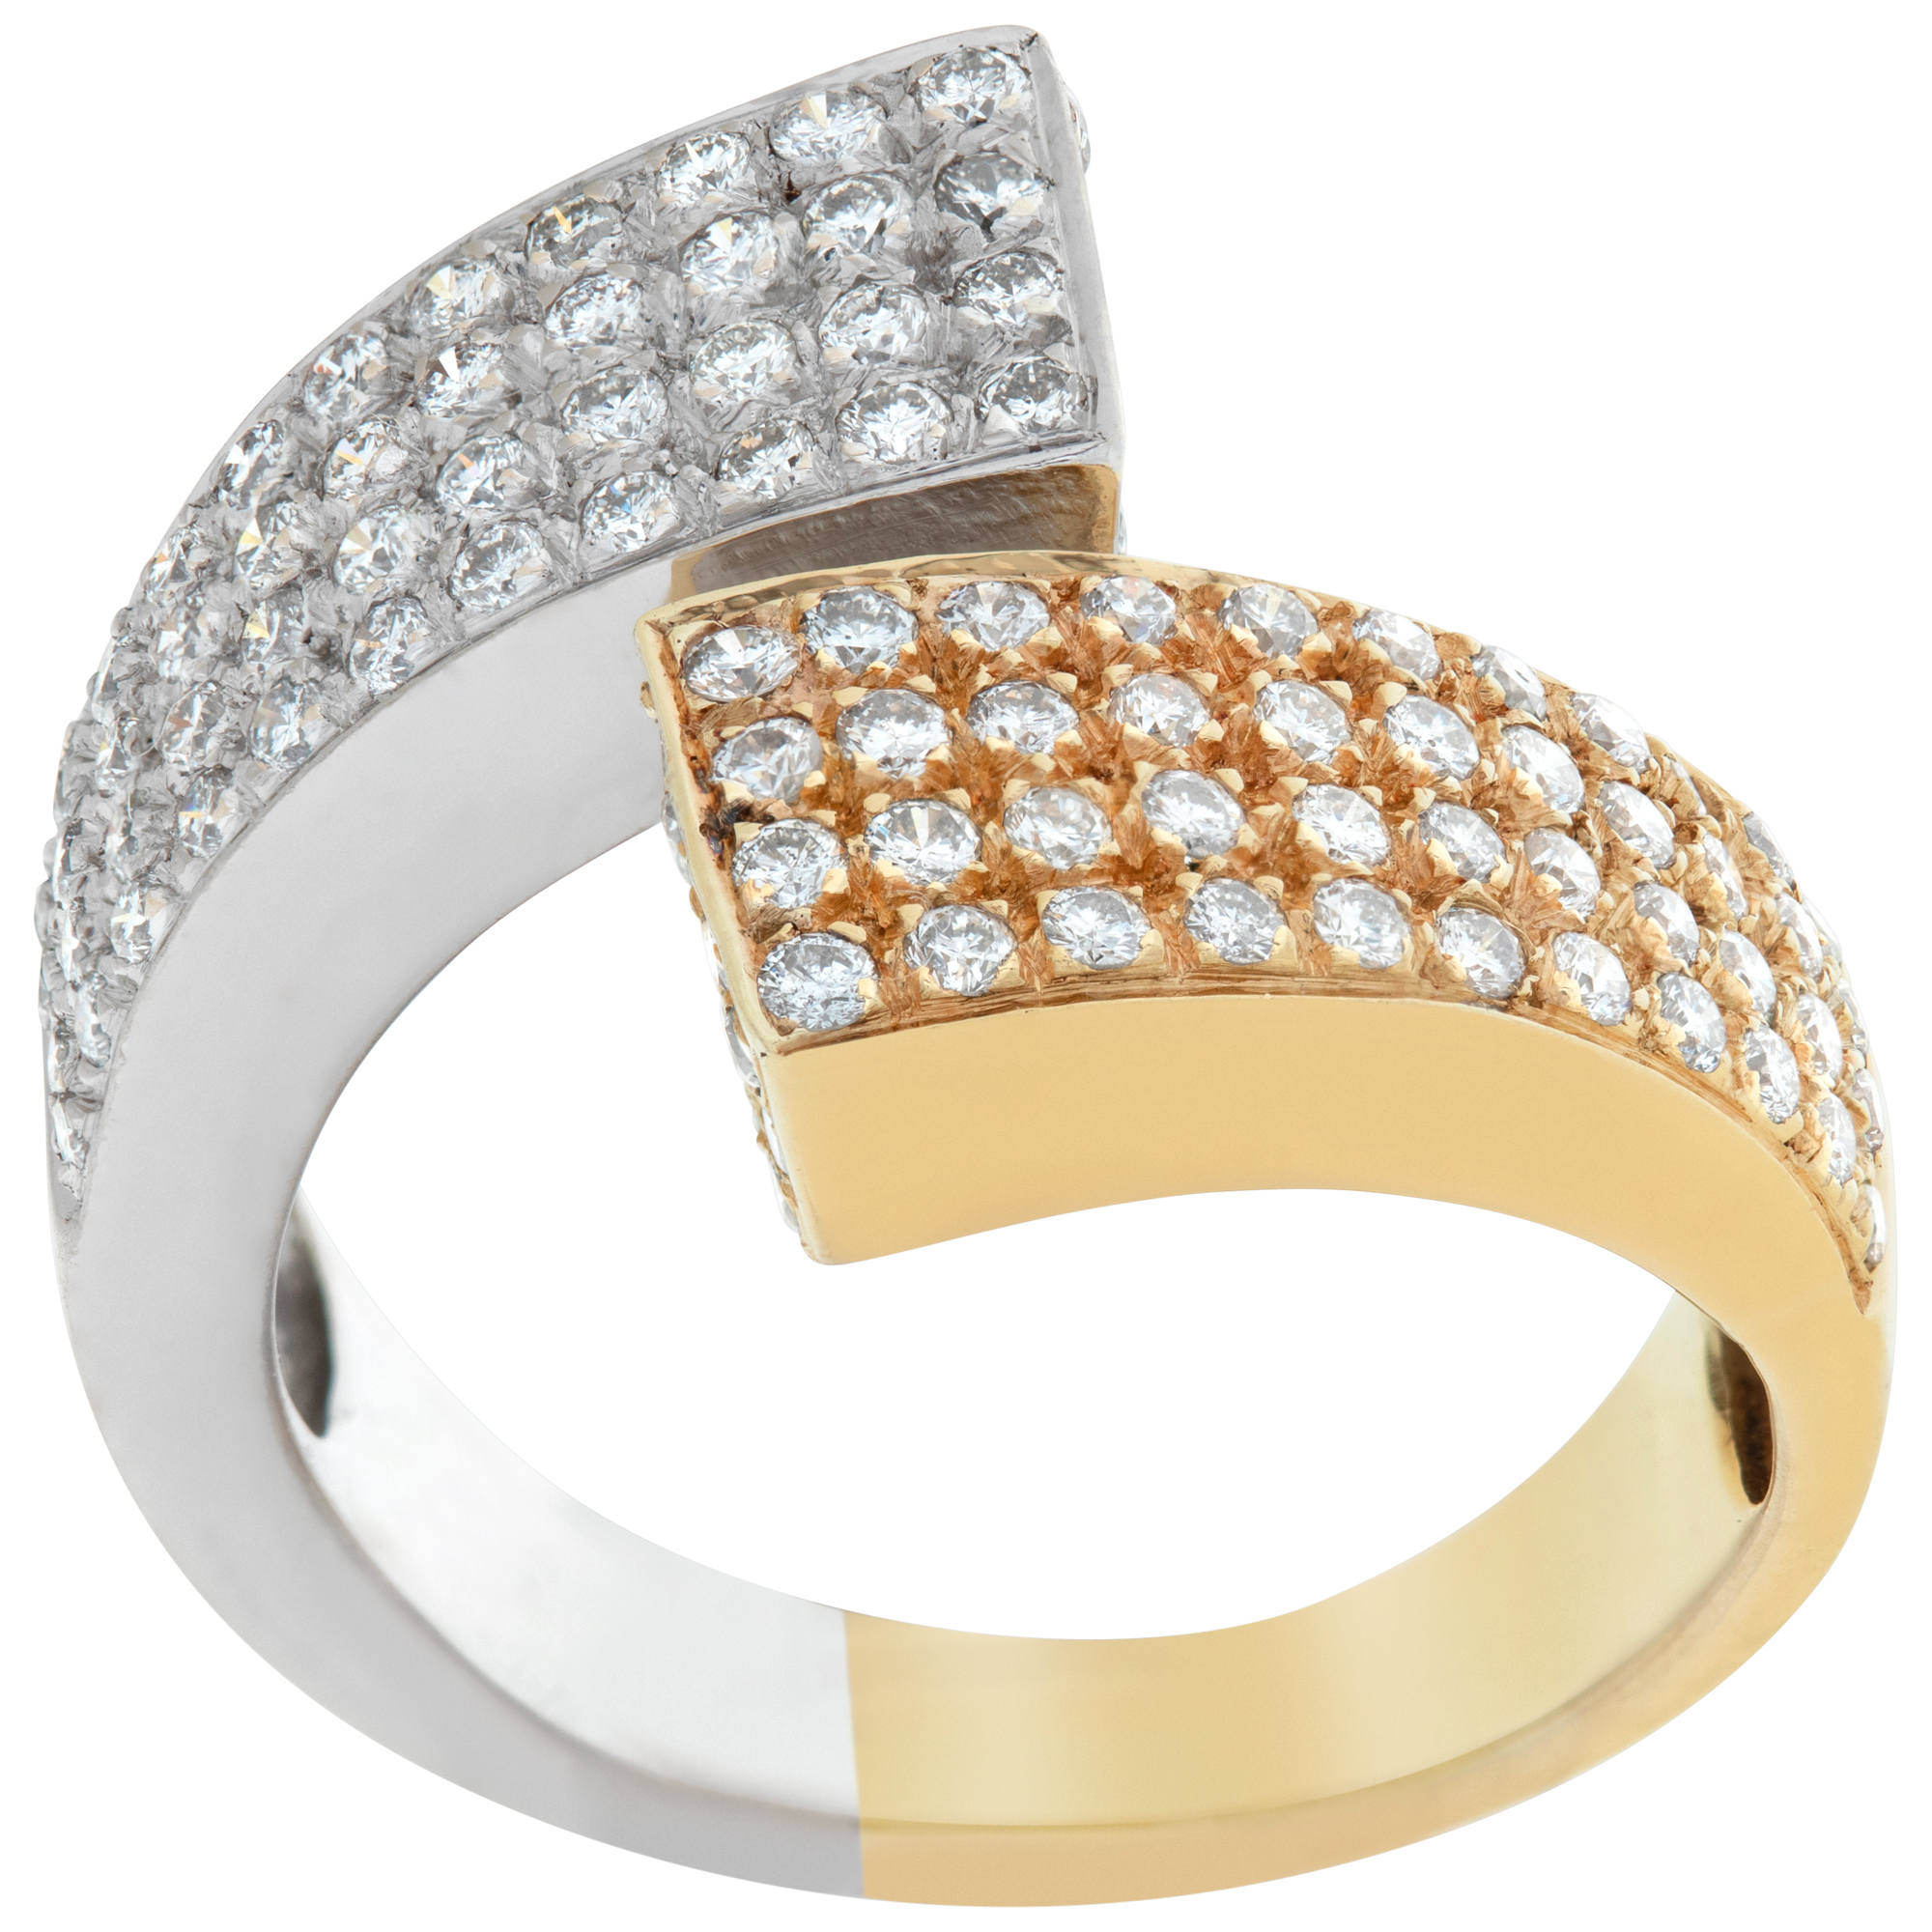 Sparkling diamond ring in 18k white & yellow gold. 1.40cts in diamonds. Size.6 image 1